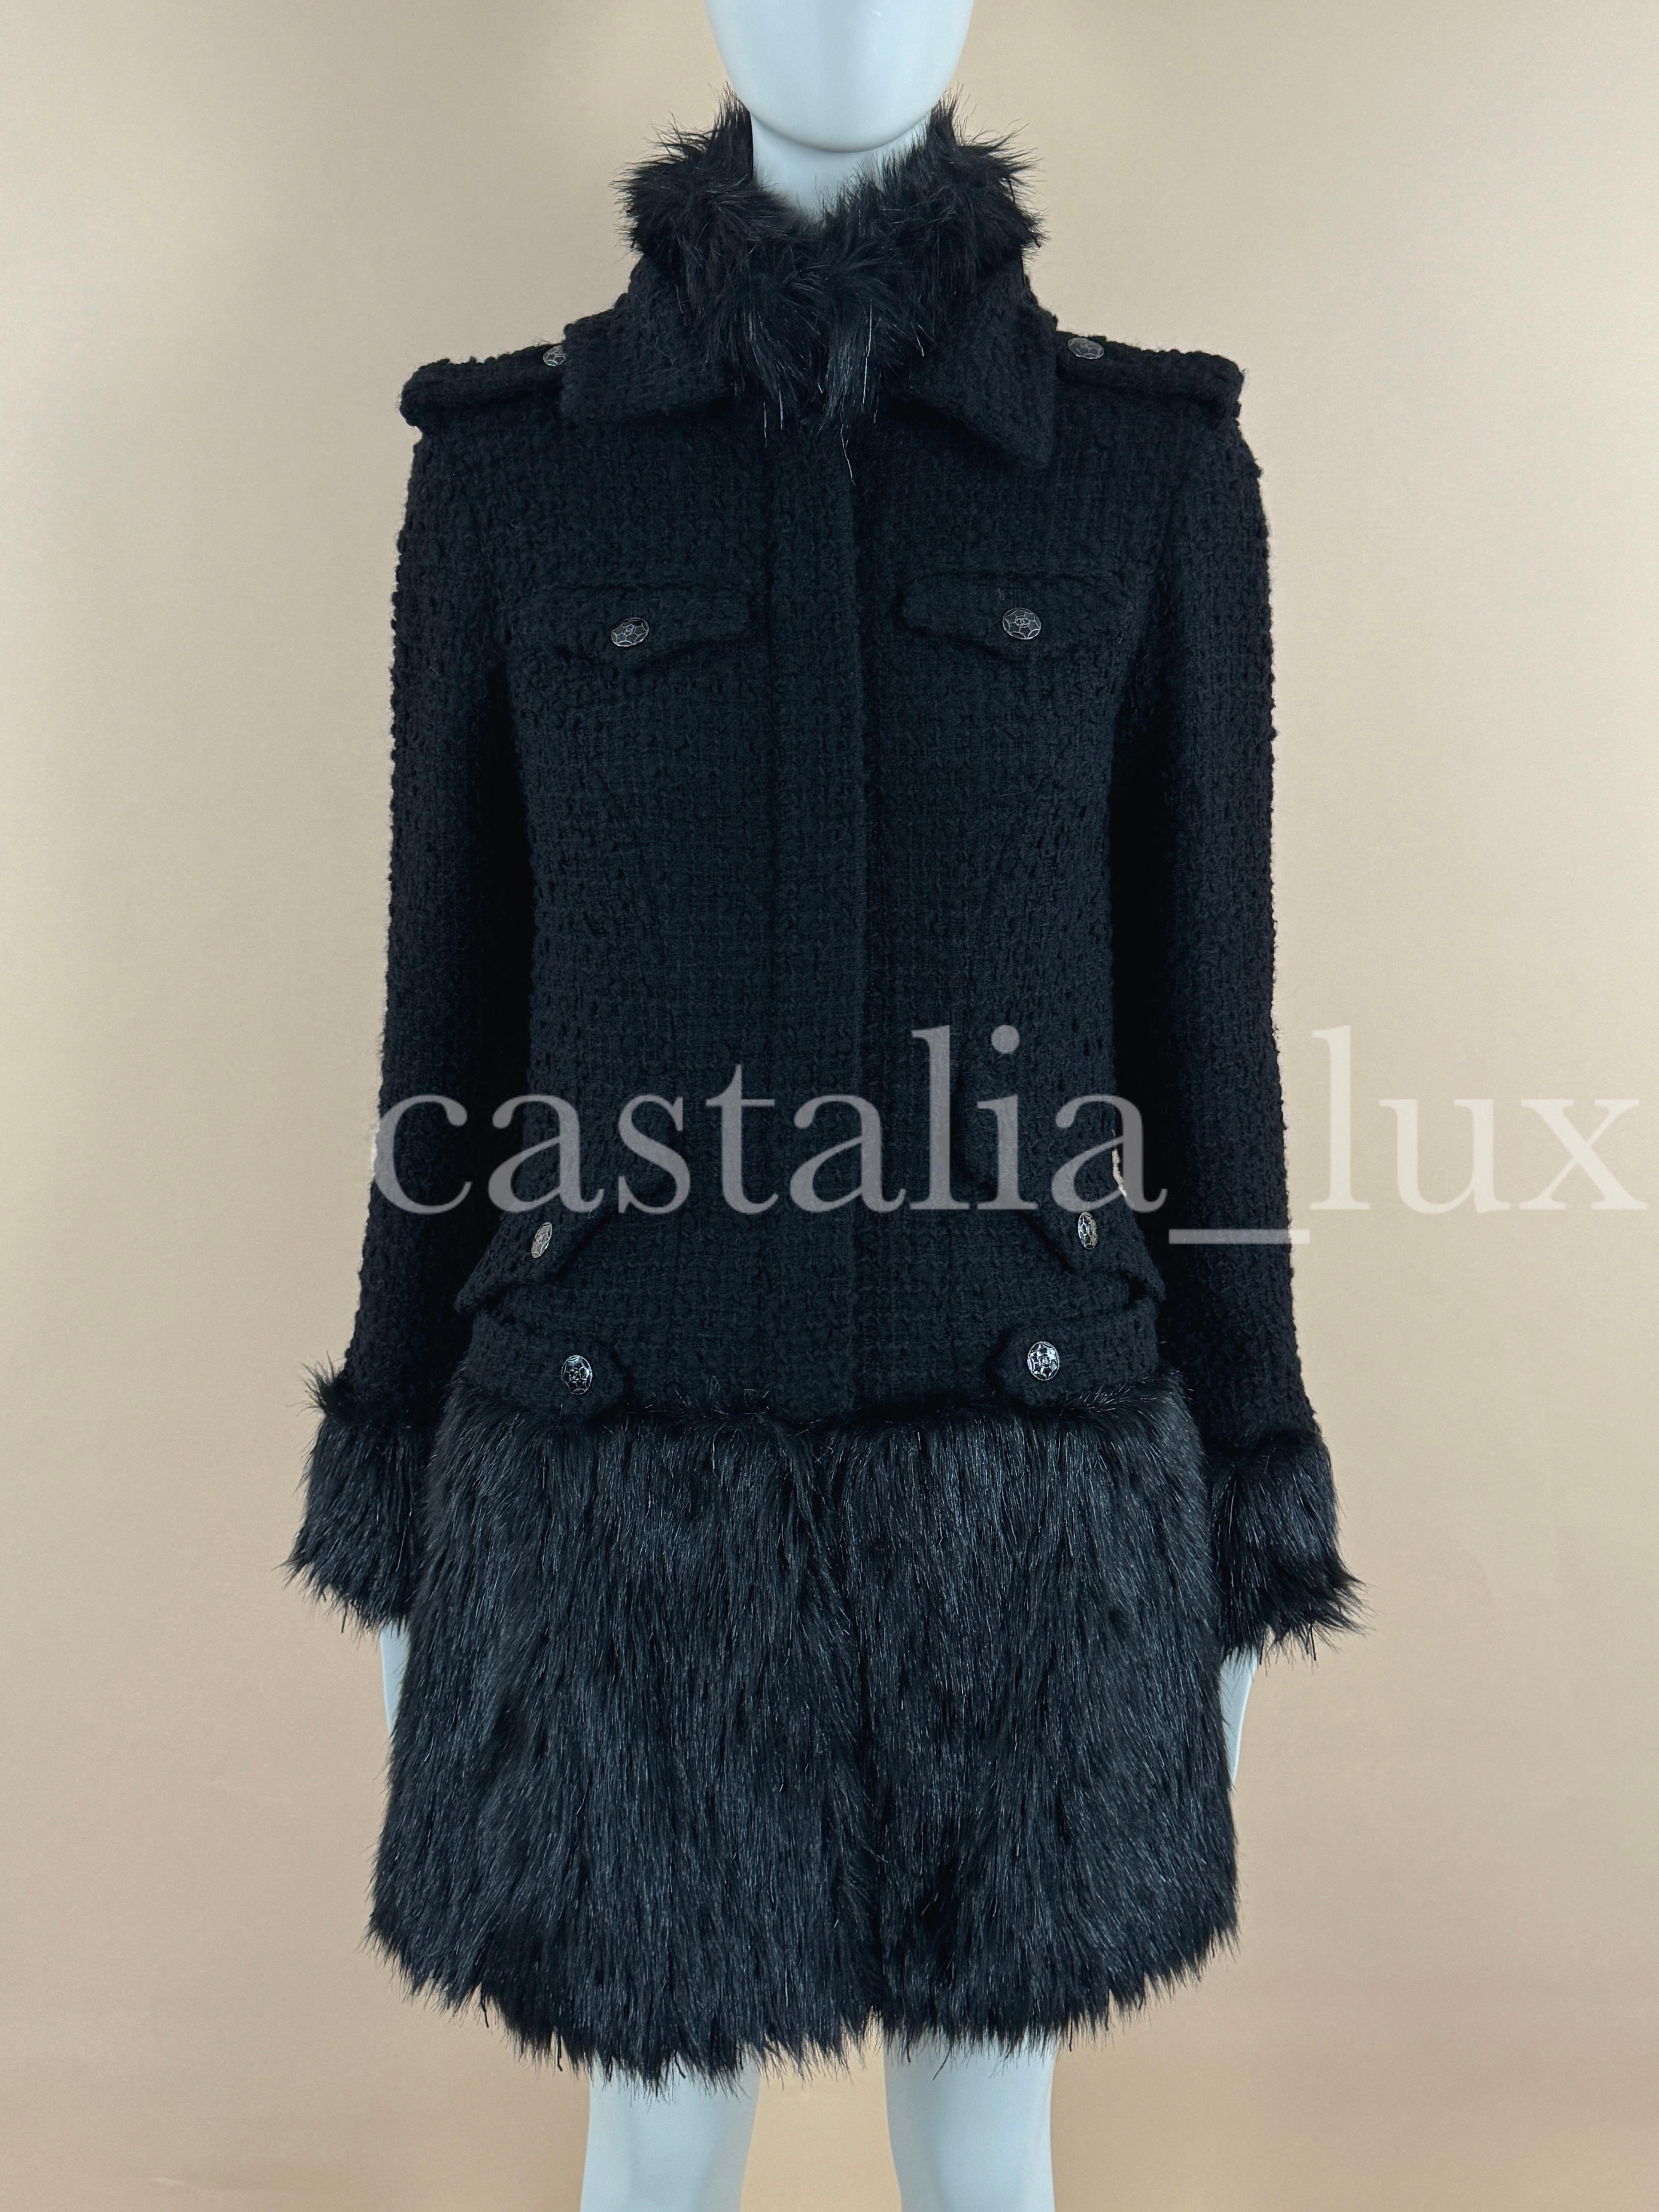 Stunning Chanel black tweed coat with fantasy faux fur details -- from ARCTIC ICE Collection by Karl Lagerfeld.
- CC logo jewel buttons, logo zip front closure
- hand-crafted black bead accents throughout the fur parts
- full silk lining
SIse mark